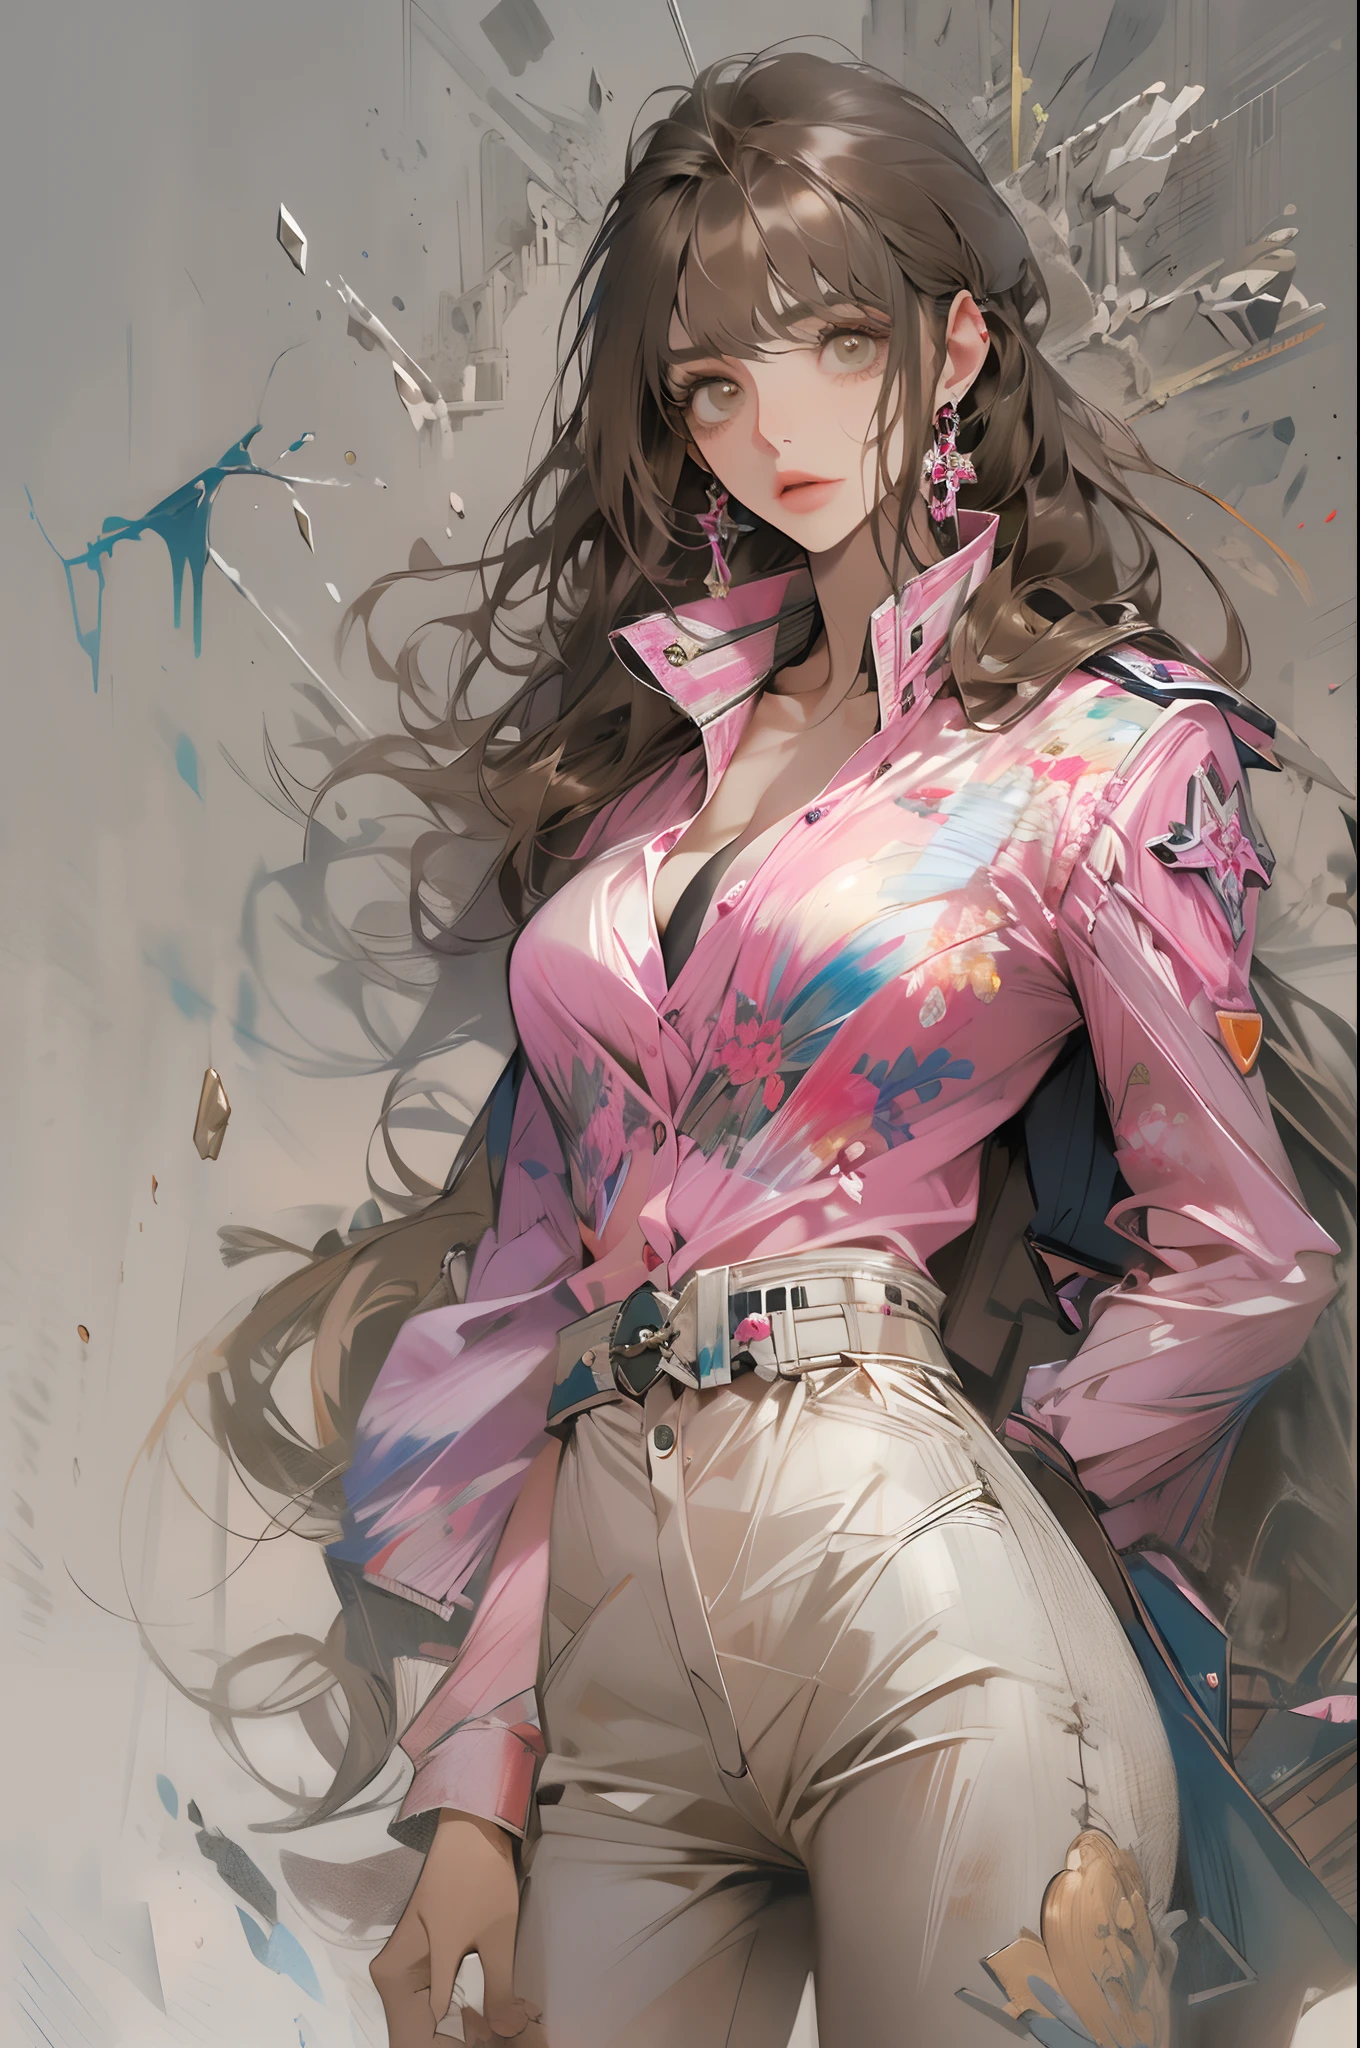 (Highest resolution, distinct_image) Best quality, A masterpiece of women, Highly detailed, Half realistic,(Most of the body),Pink Long Hair, bangs, 18 years old, Young,Black accessories,Pink-purple flight suit,stand-up collared shirt,sharpy face,(Brown eyes, hair between eye), Fluorescent long coating (Broken glass),(Plain white background),Cold, Serious,authoritative,Powerful,(Standing painting),(Exquisite facial features, Exquisite facial features)（（gigantic cleavage breasts））